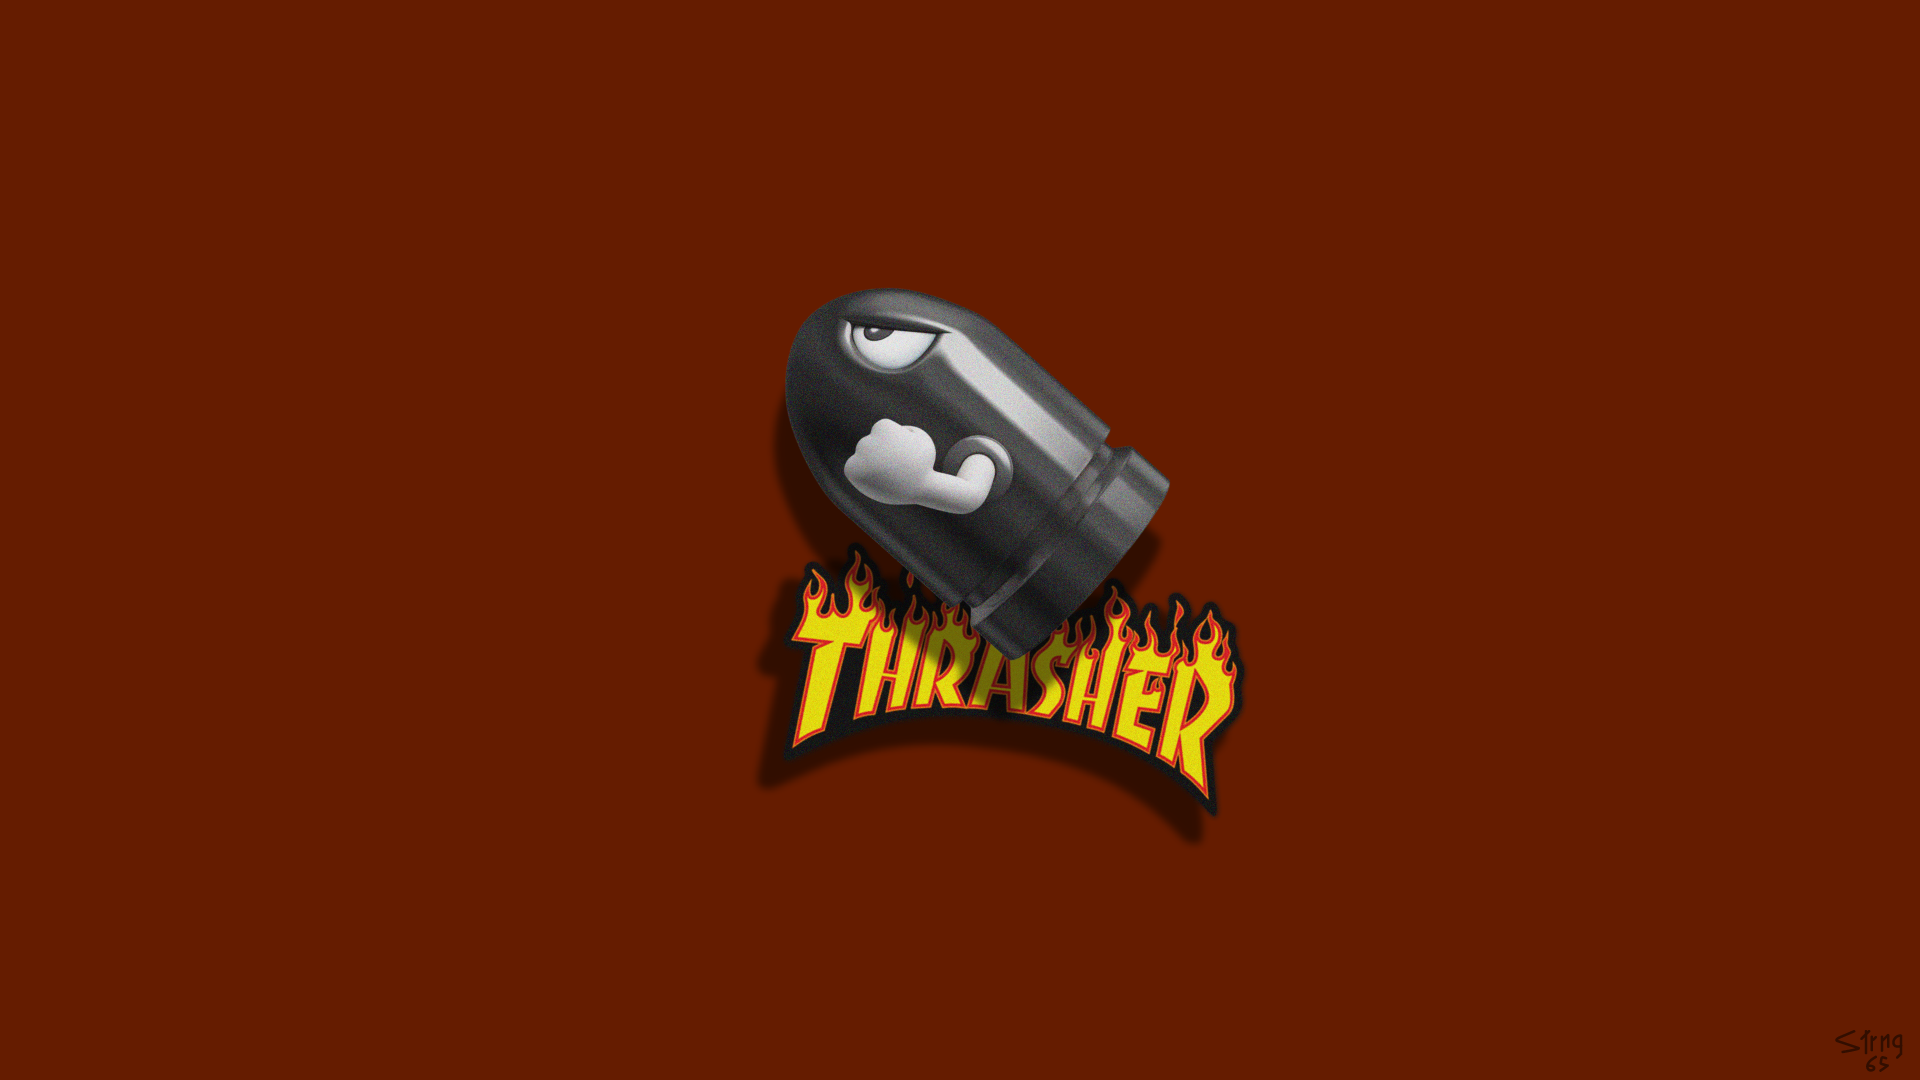 General 1920x1080 Thrasher minimalism simple background red artwork logo video game characters